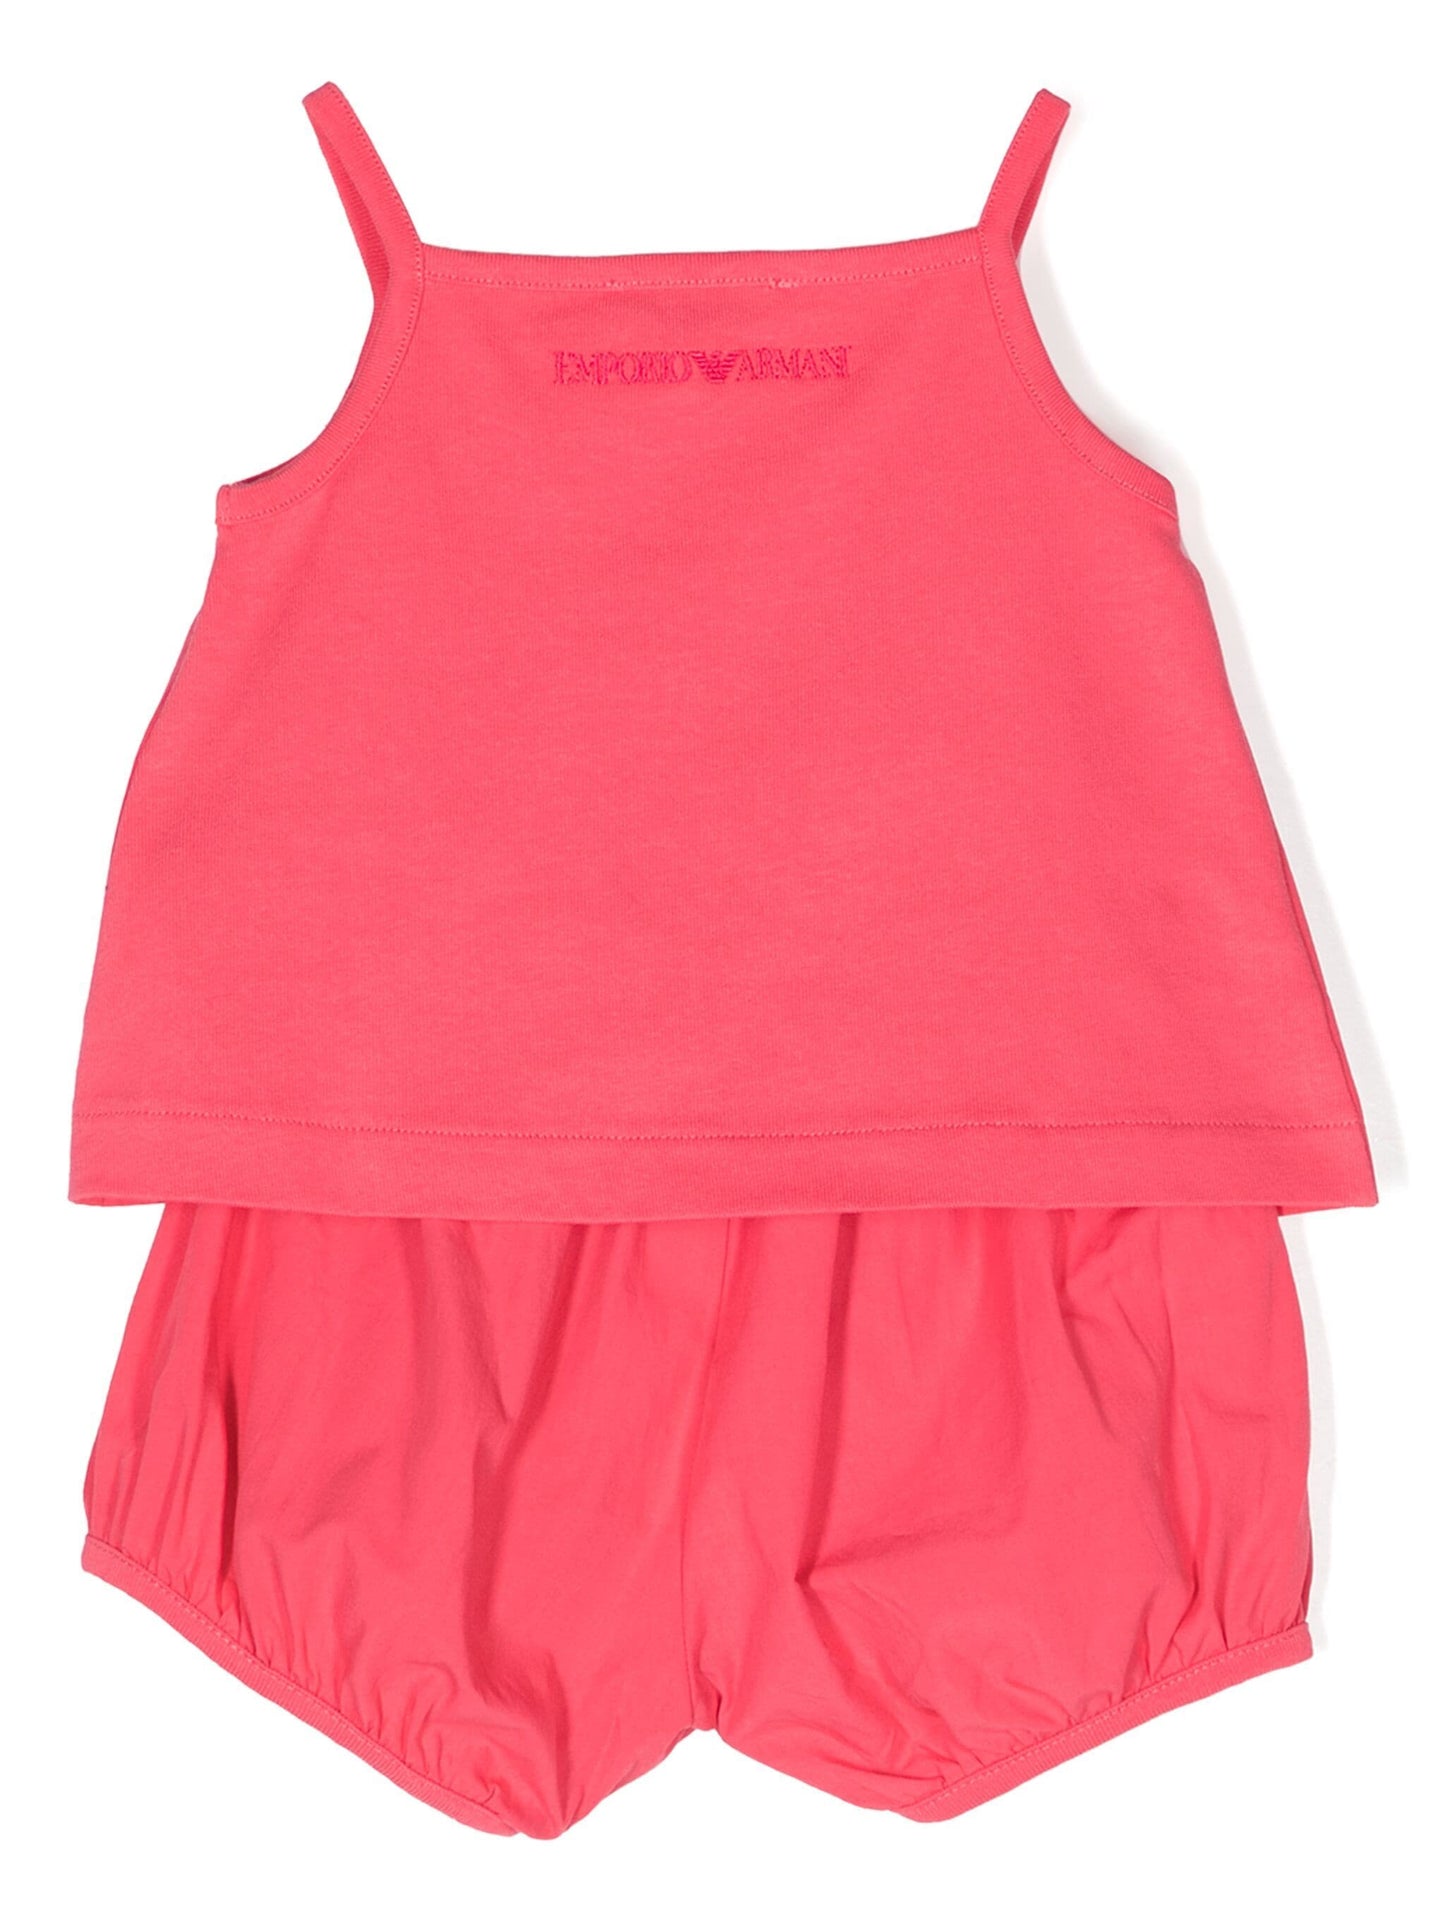 Armani Junior Baby Girl's 2Pc Jersey Tank Top & Shorts Outfit